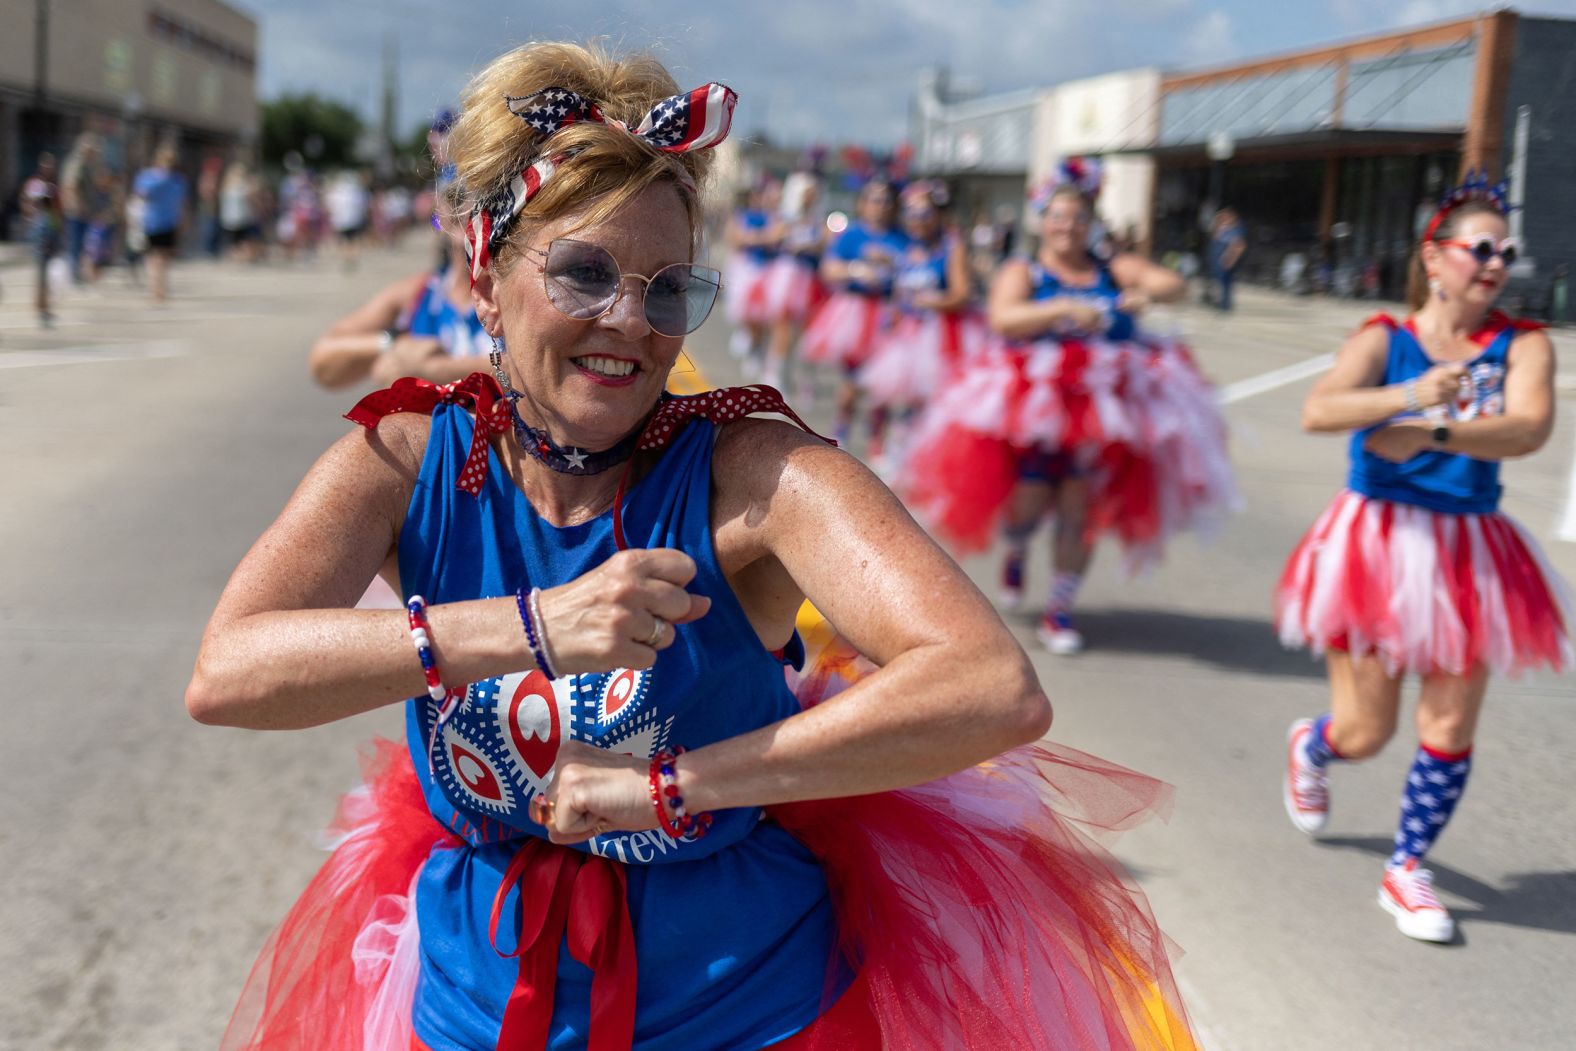 A member of the Tutu Live Krewe marches during a parade in Texas City, Texas, on Tuesday.